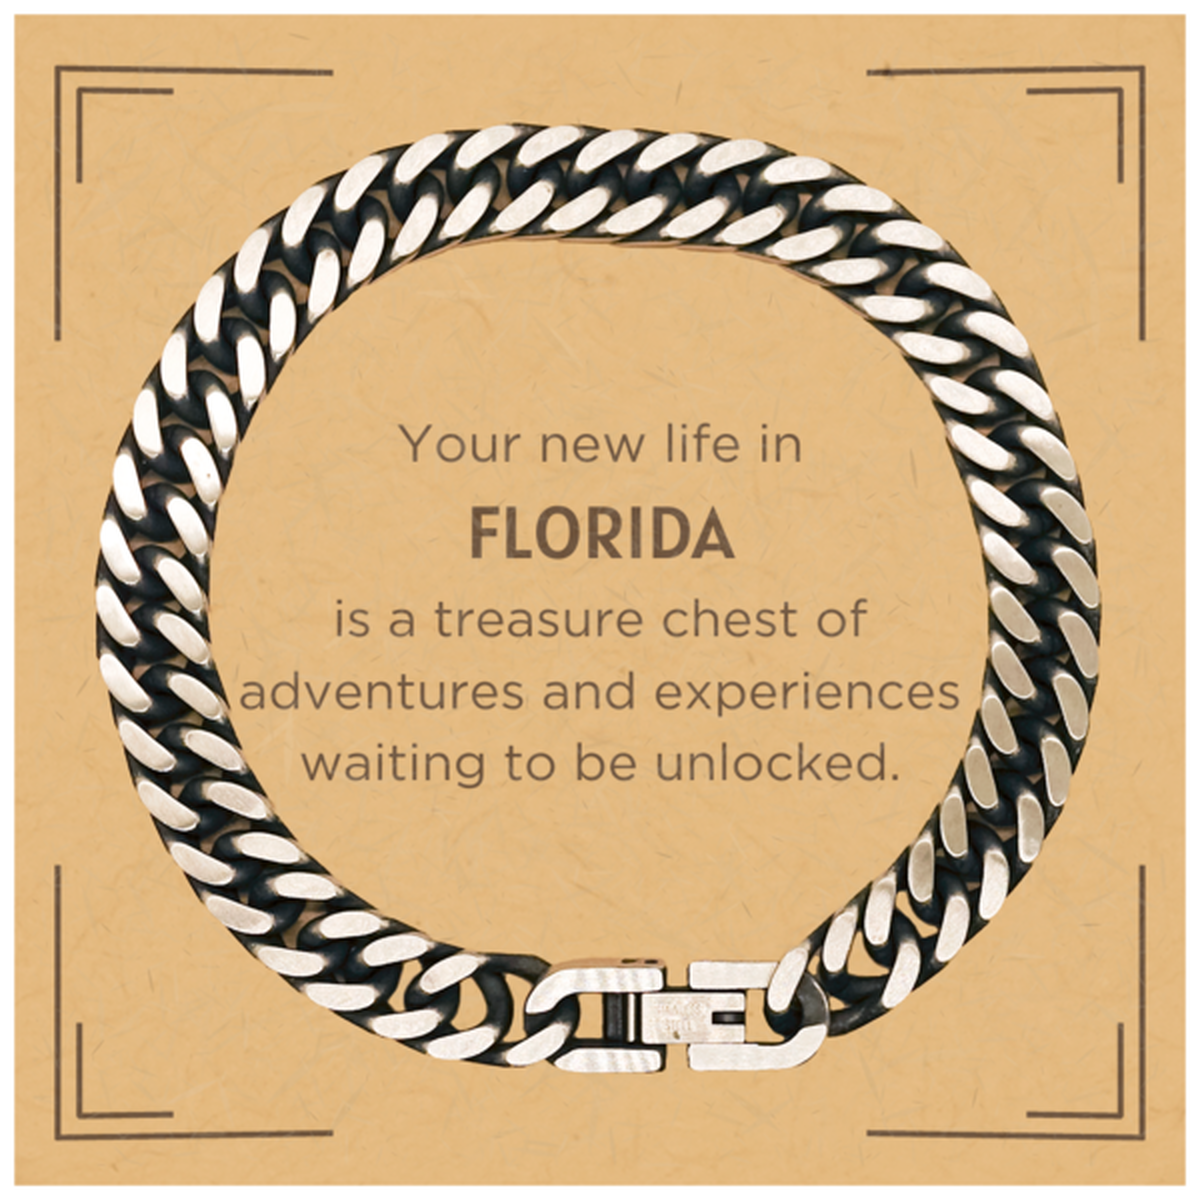 Moving to Florida Gifts, Your new life in Florida, Long Distance Florida Christmas Cuban Link Chain Bracelet For Men, Women, Friends, Coworkers